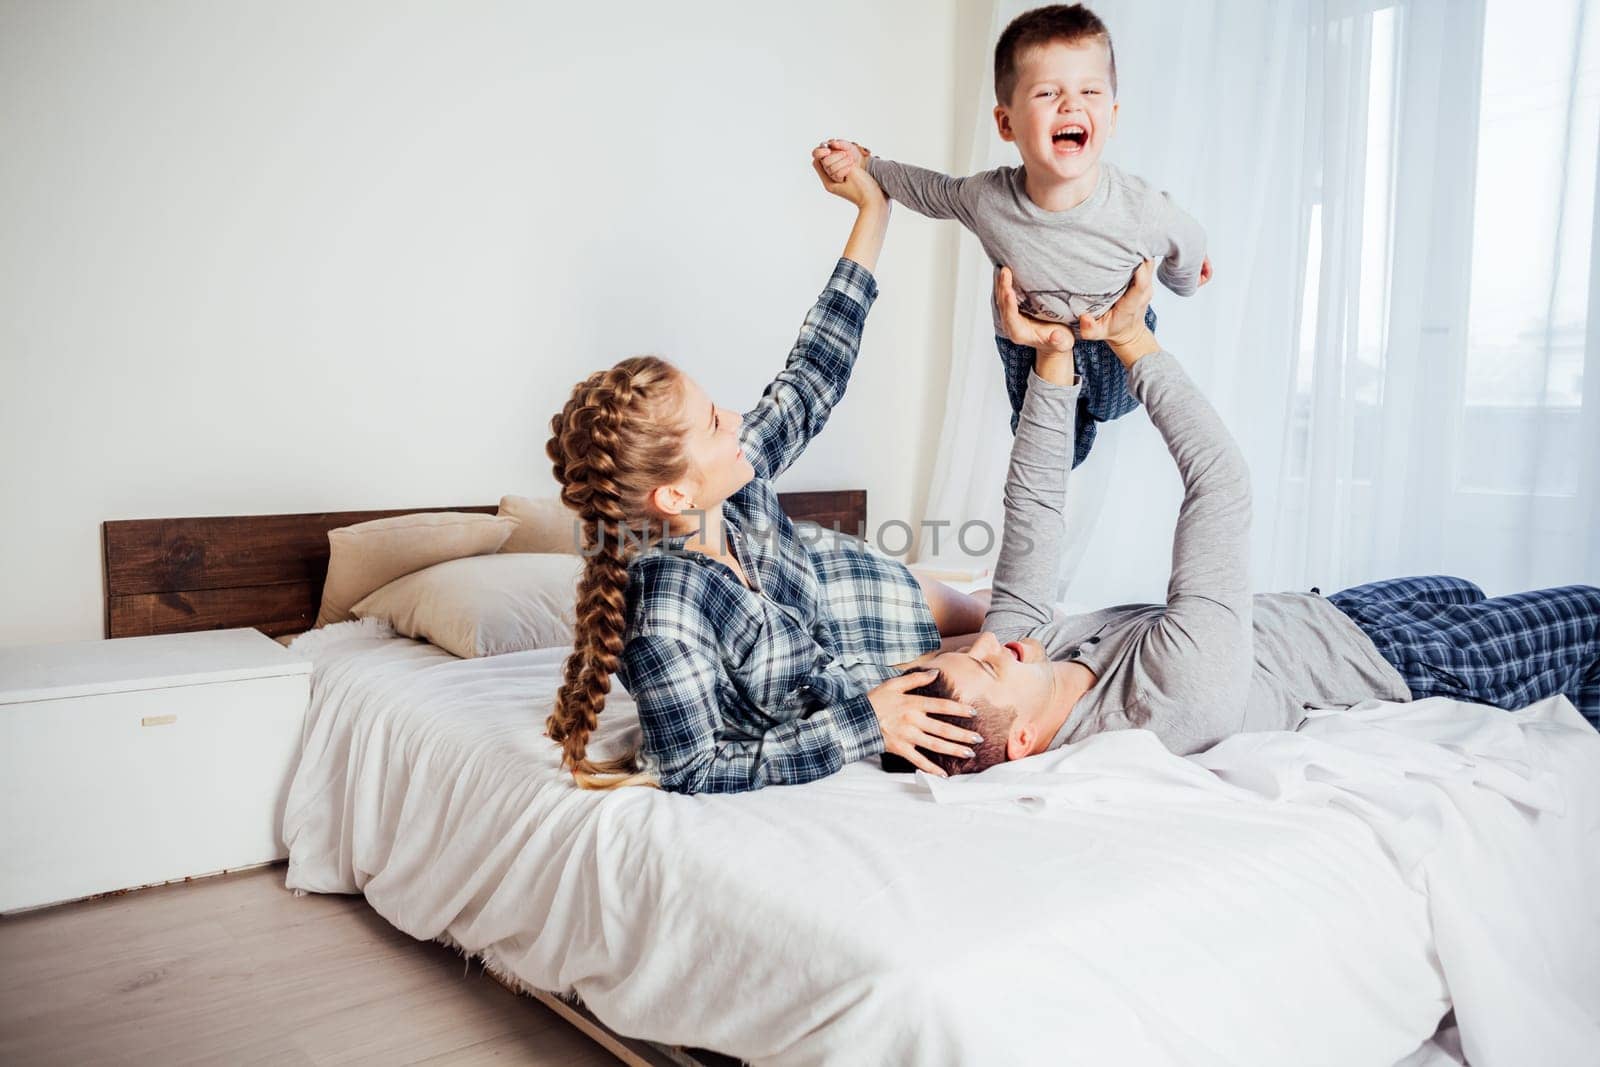 mom dad and son lie on the bed at home dream by Simakov